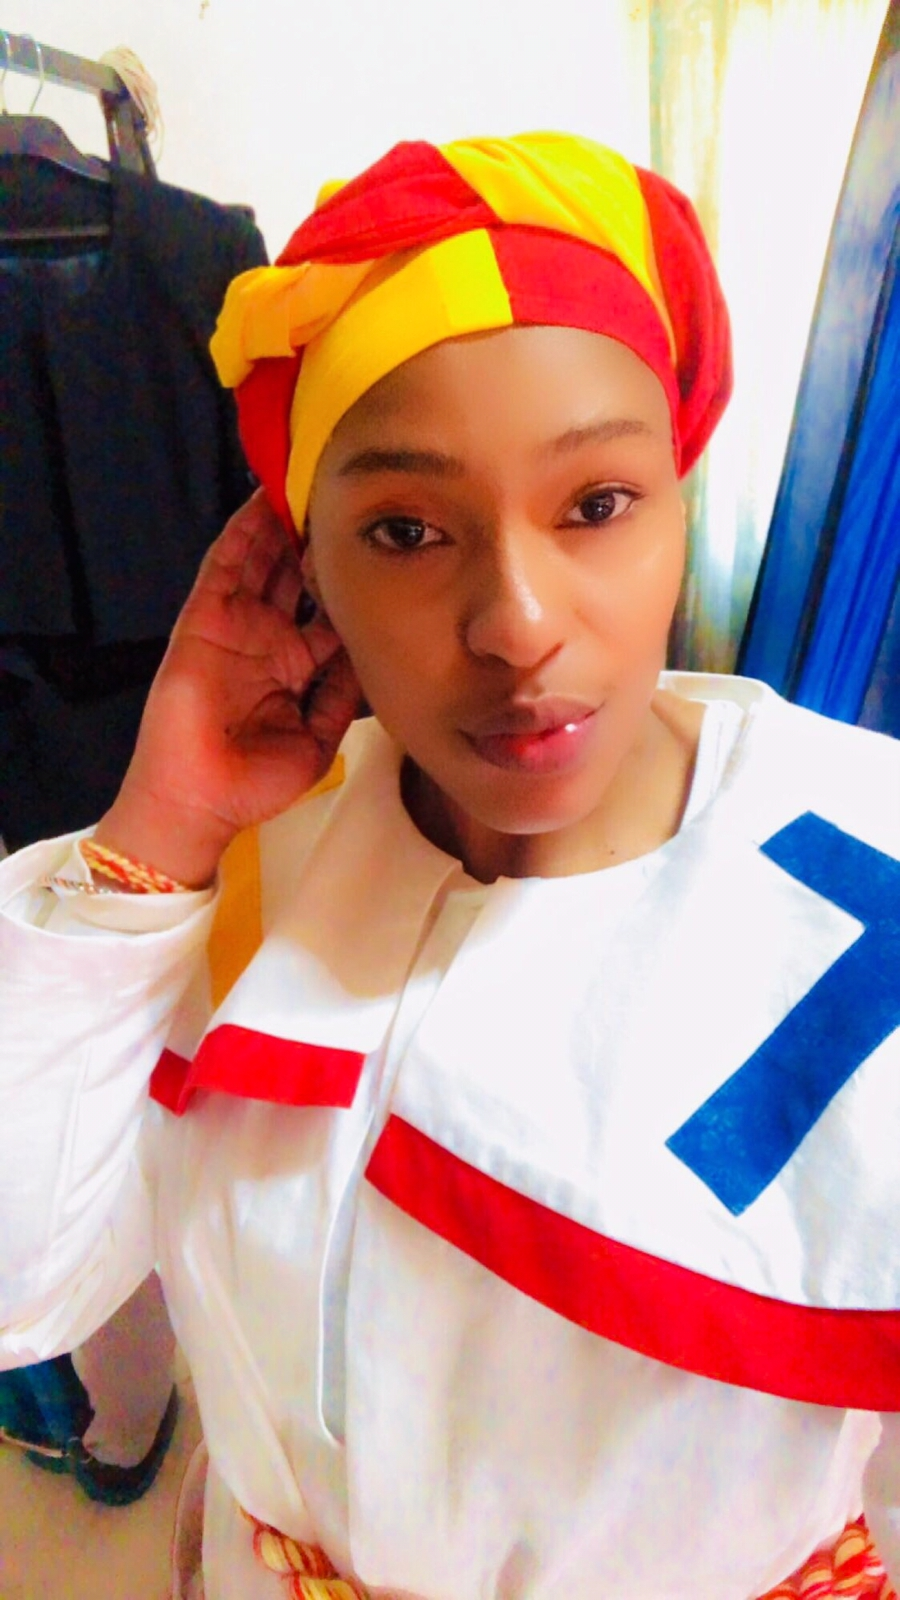 Zinhle Ngwenya accepts her calling to be a Sangoma